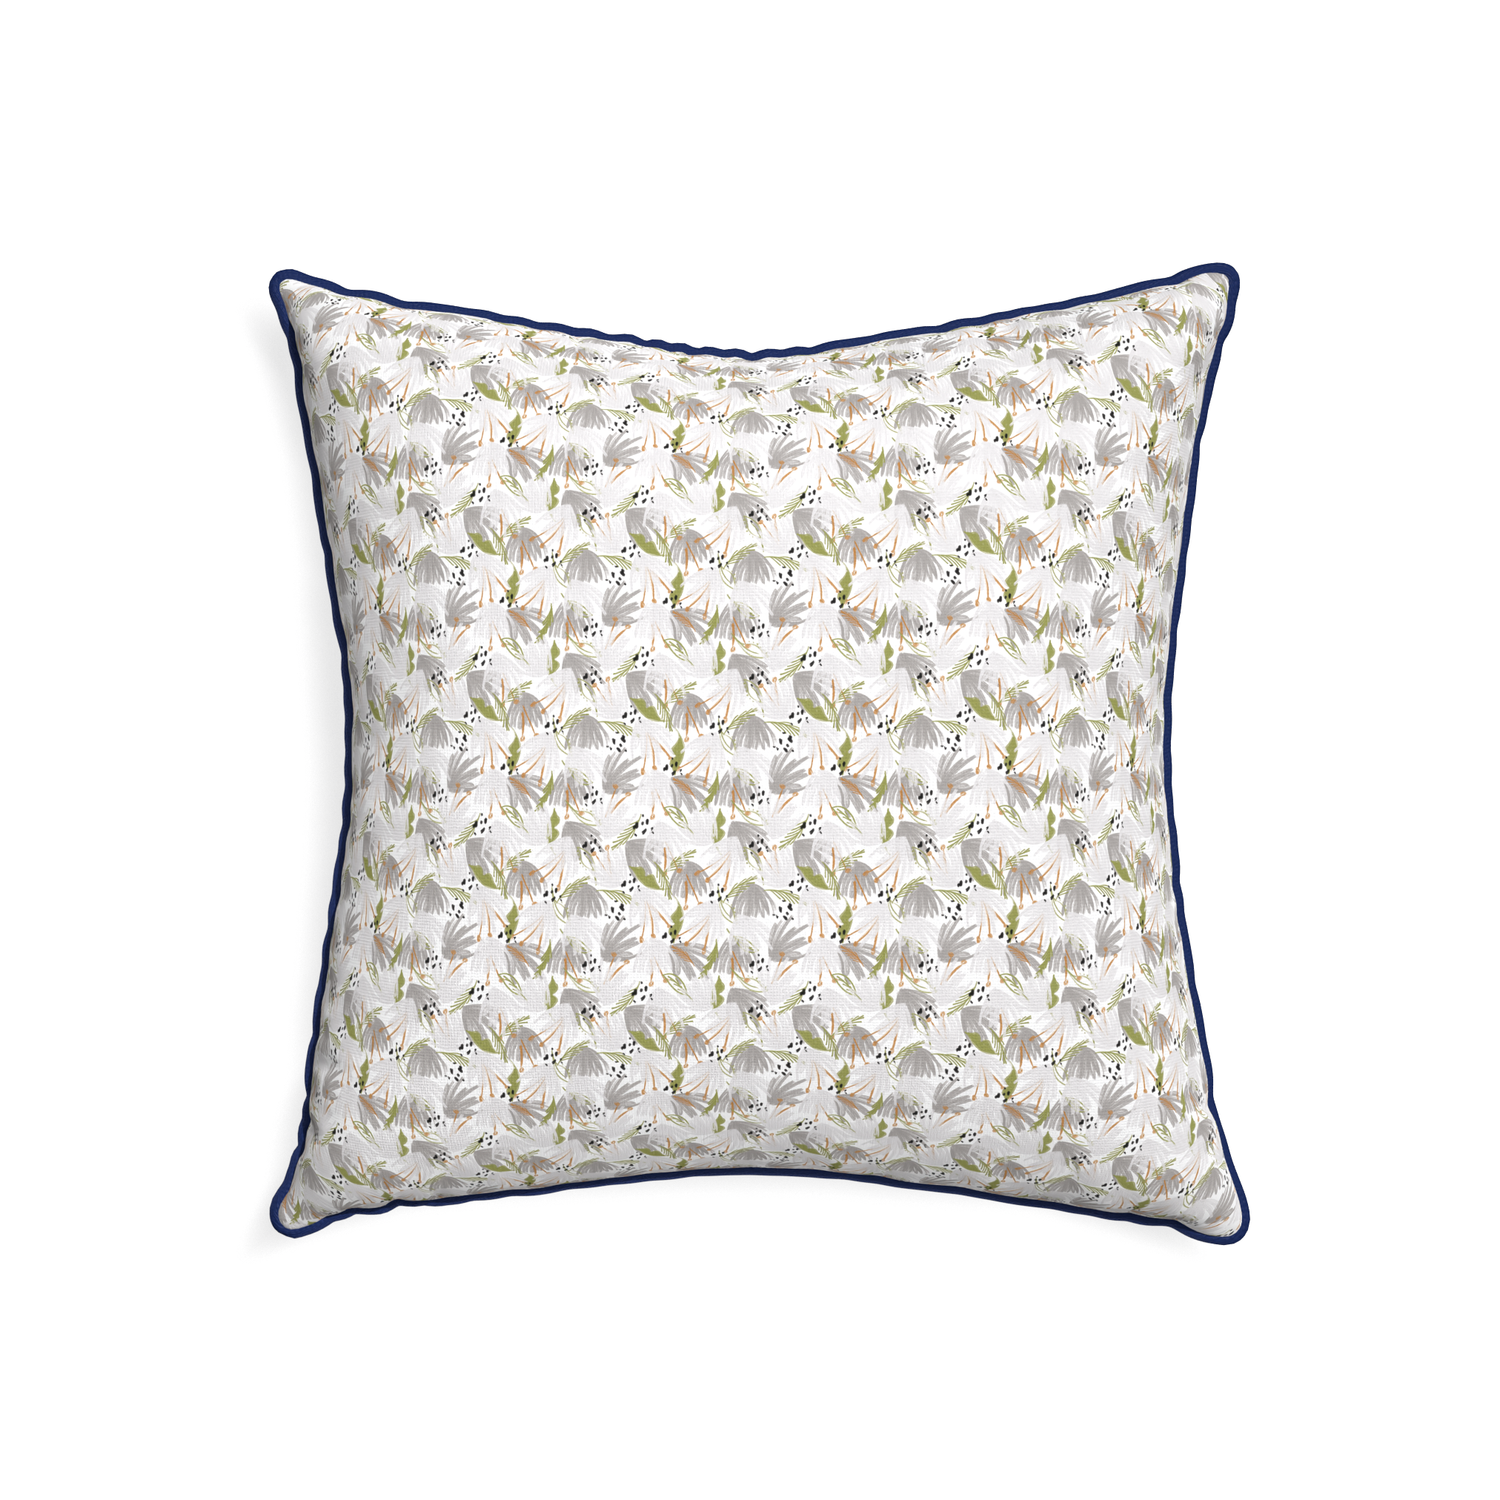 22-square eden grey custom pillow with midnight piping on white background